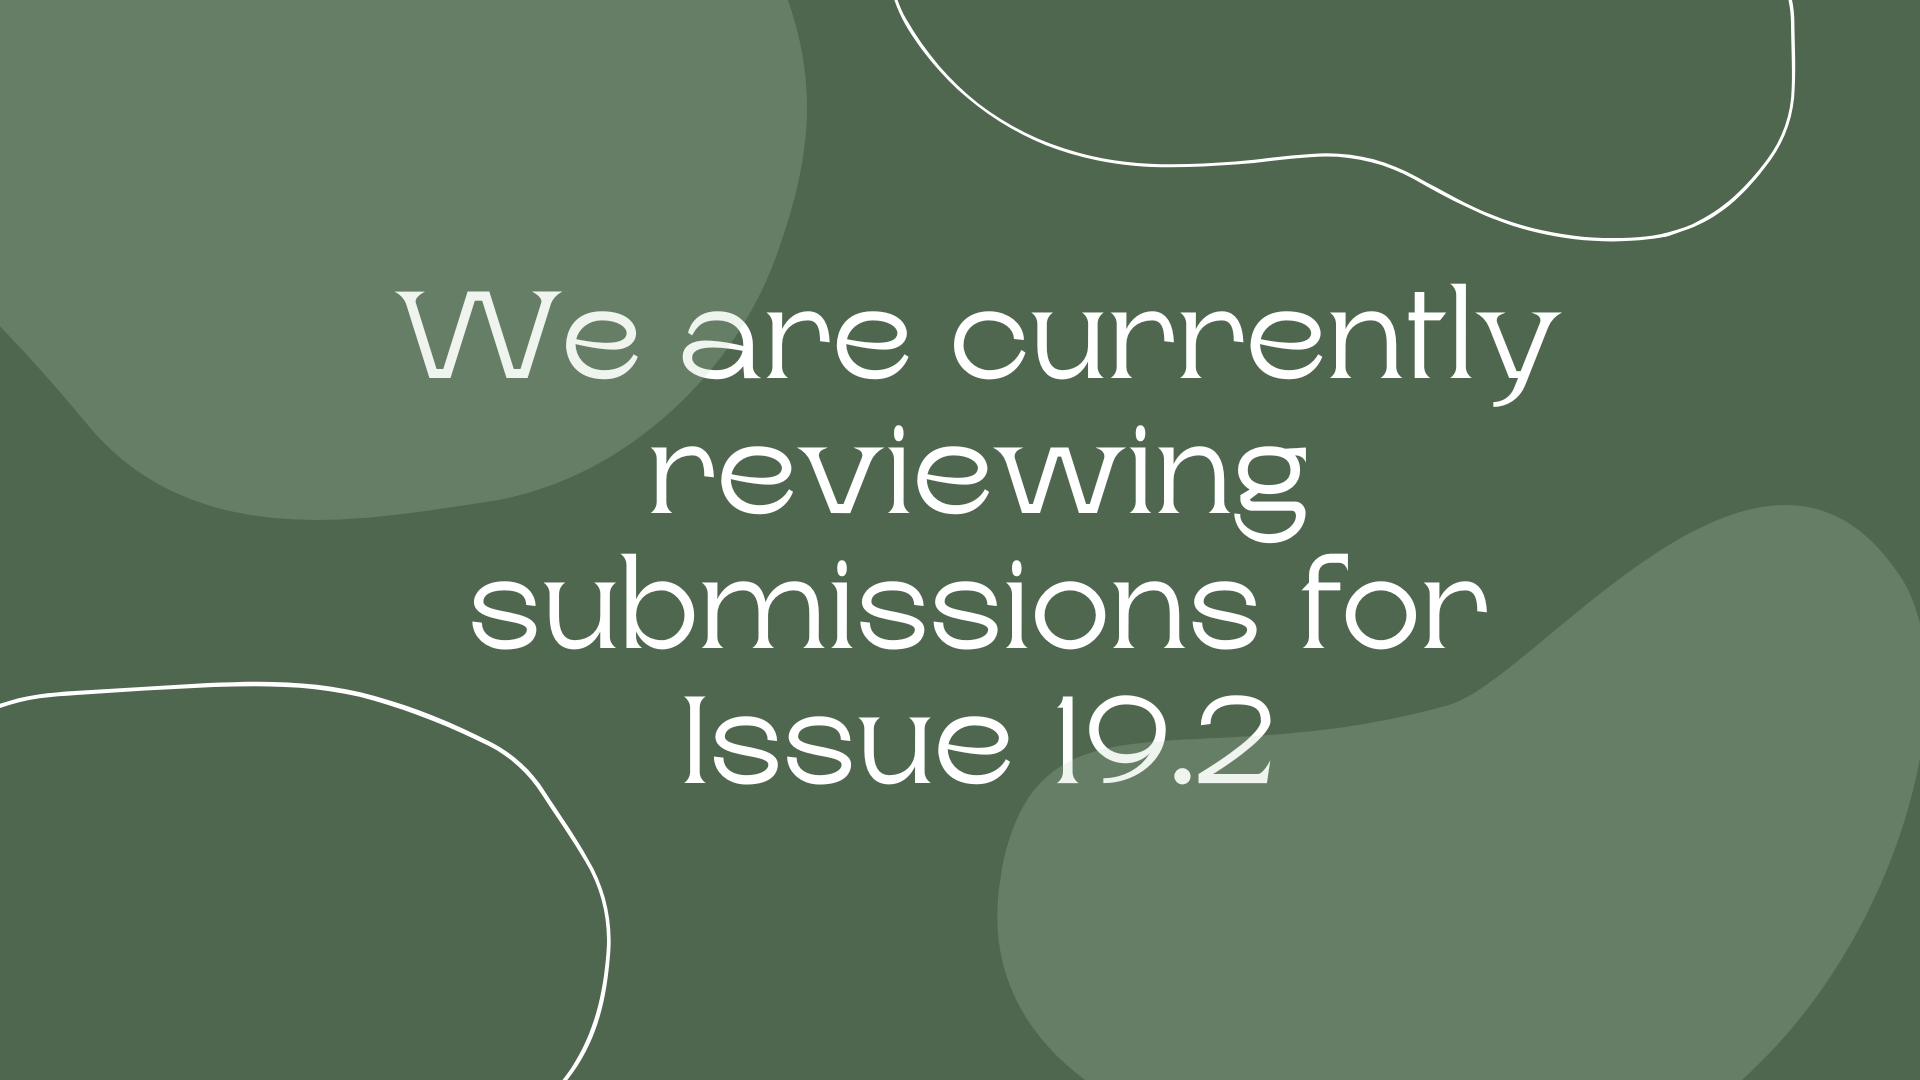 We are currently reviewing submissions for Issue 19.2